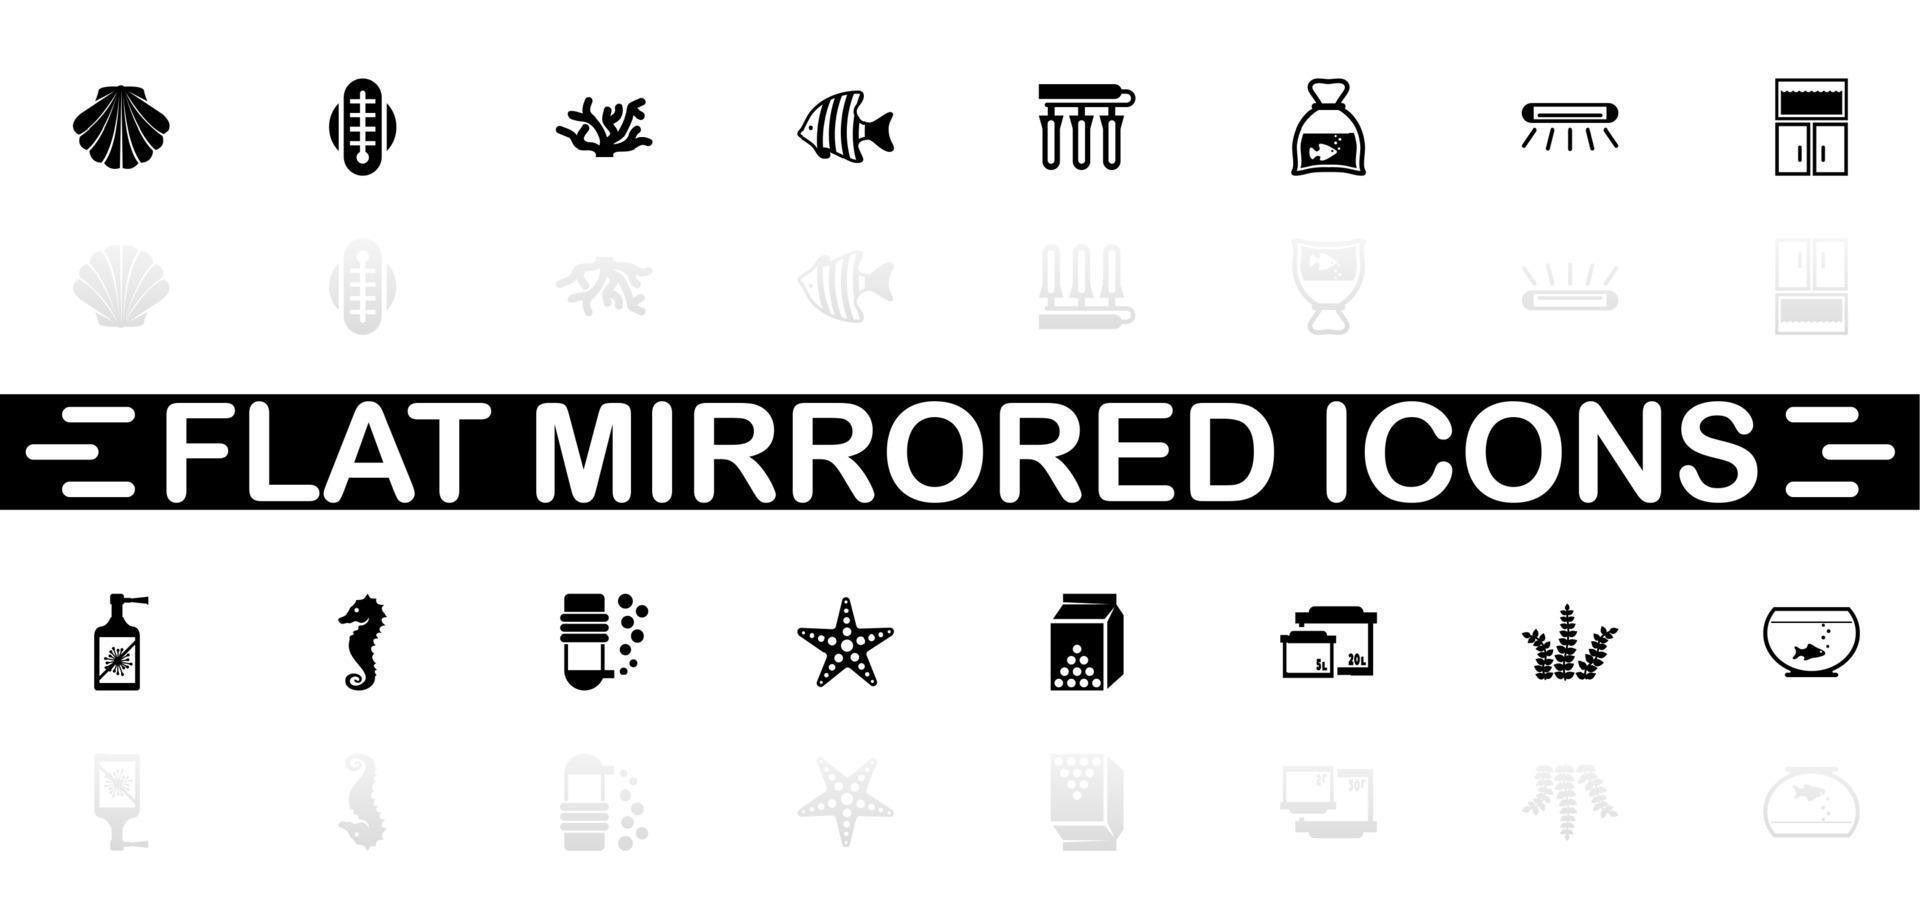 Aquarium icons - Black symbol on white background. Simple illustration. Flat Vector Icon. Mirror Reflection Shadow. Can be used in logo, web, mobile and UI UX project.